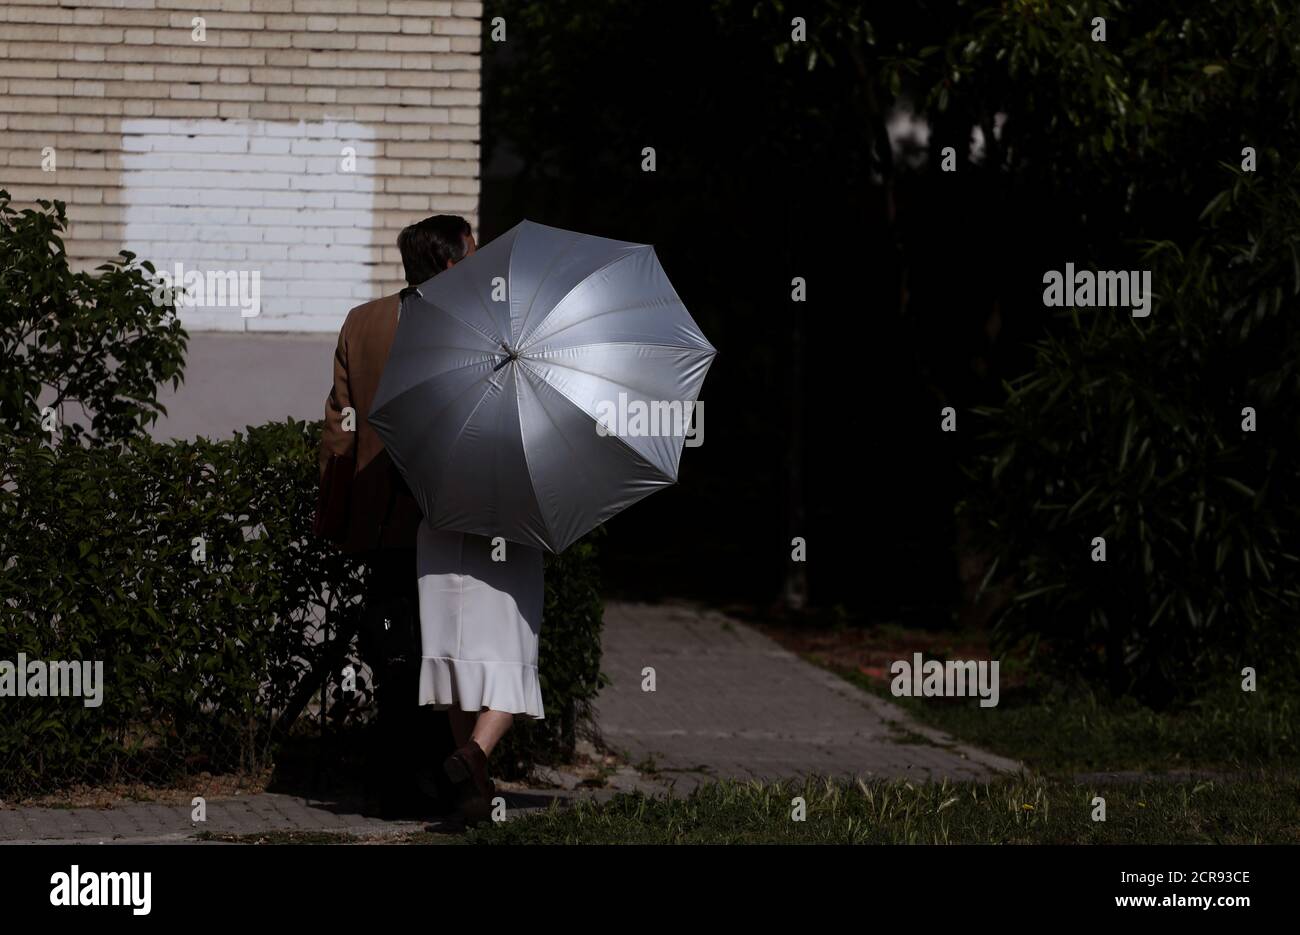 A woman shields from the sun with an umbrella during a sunny day in Madrid, Spain, May 23, 2018. REUTERS/Sergio Perez Stock Photo